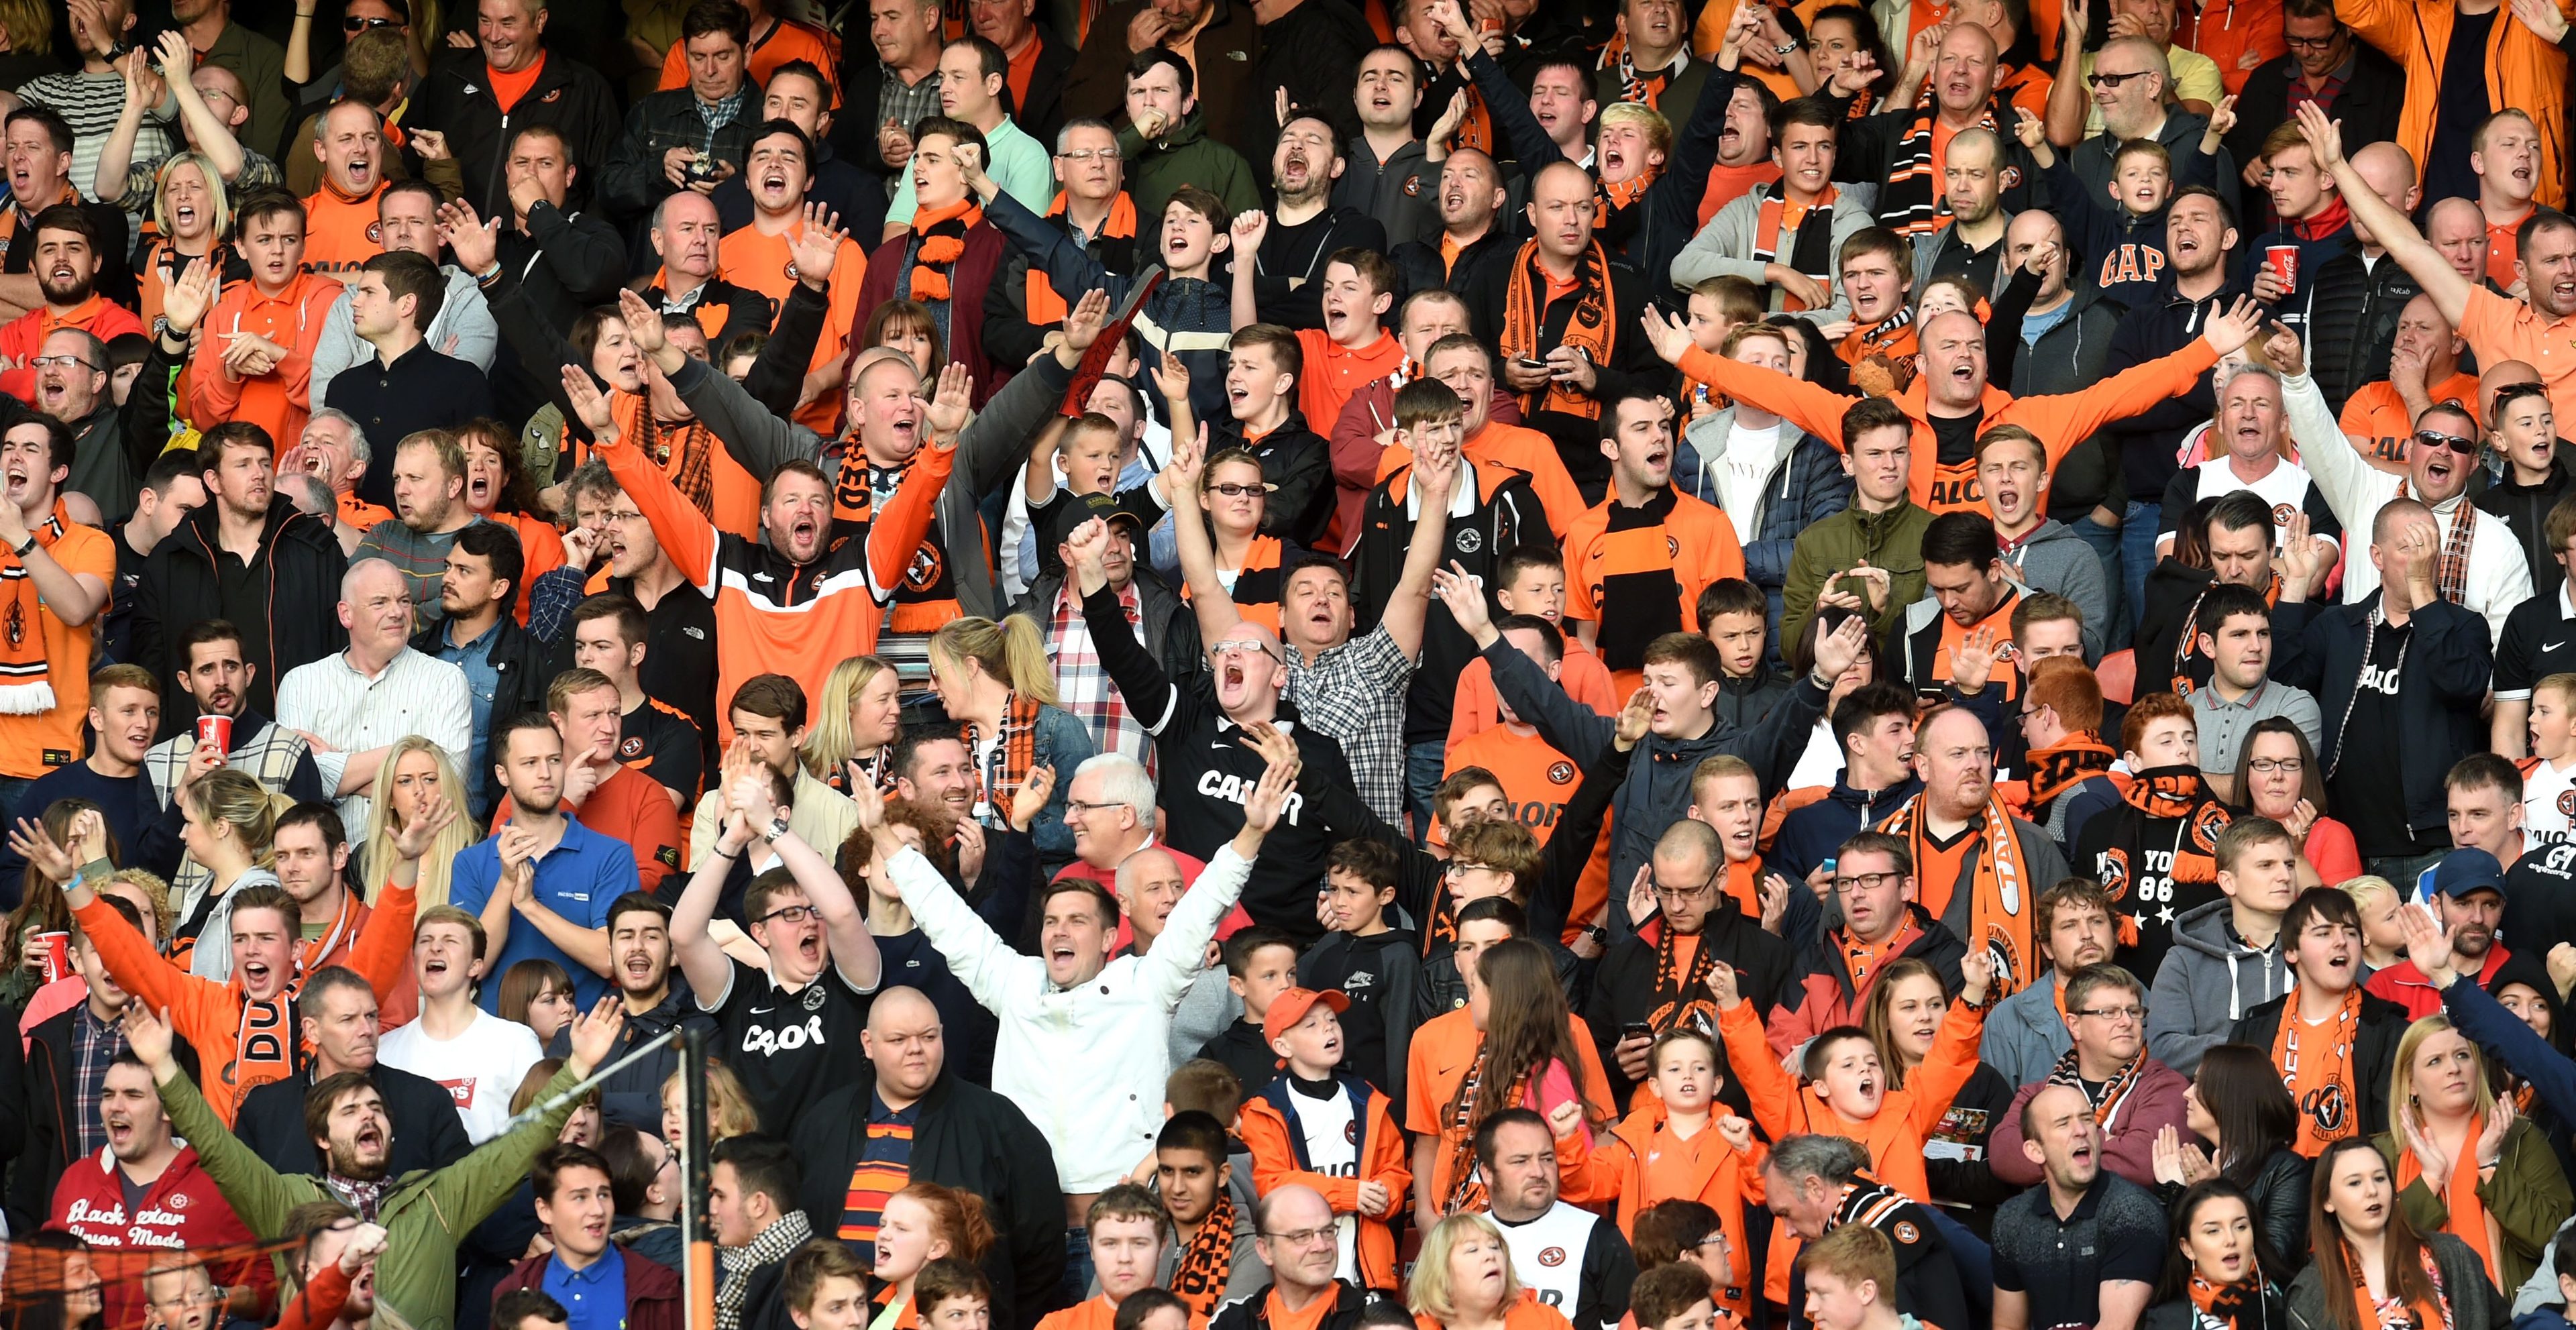 Dundee Utd fans make some noise in happier times